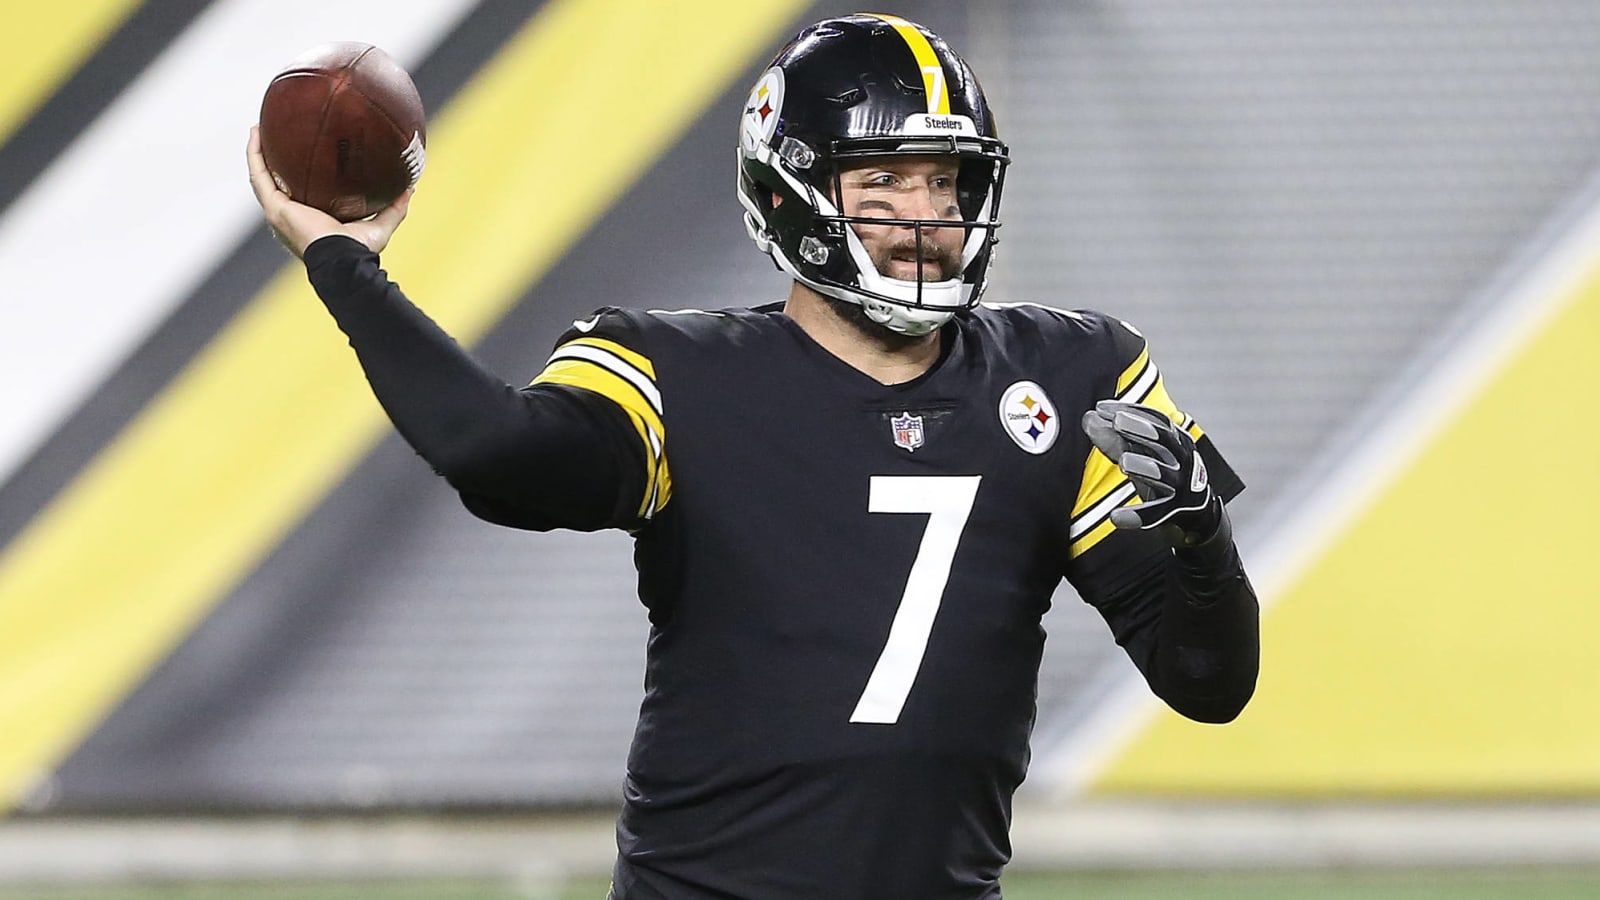 Roethlisberger hopes to be 'last old man standing' in playoffs